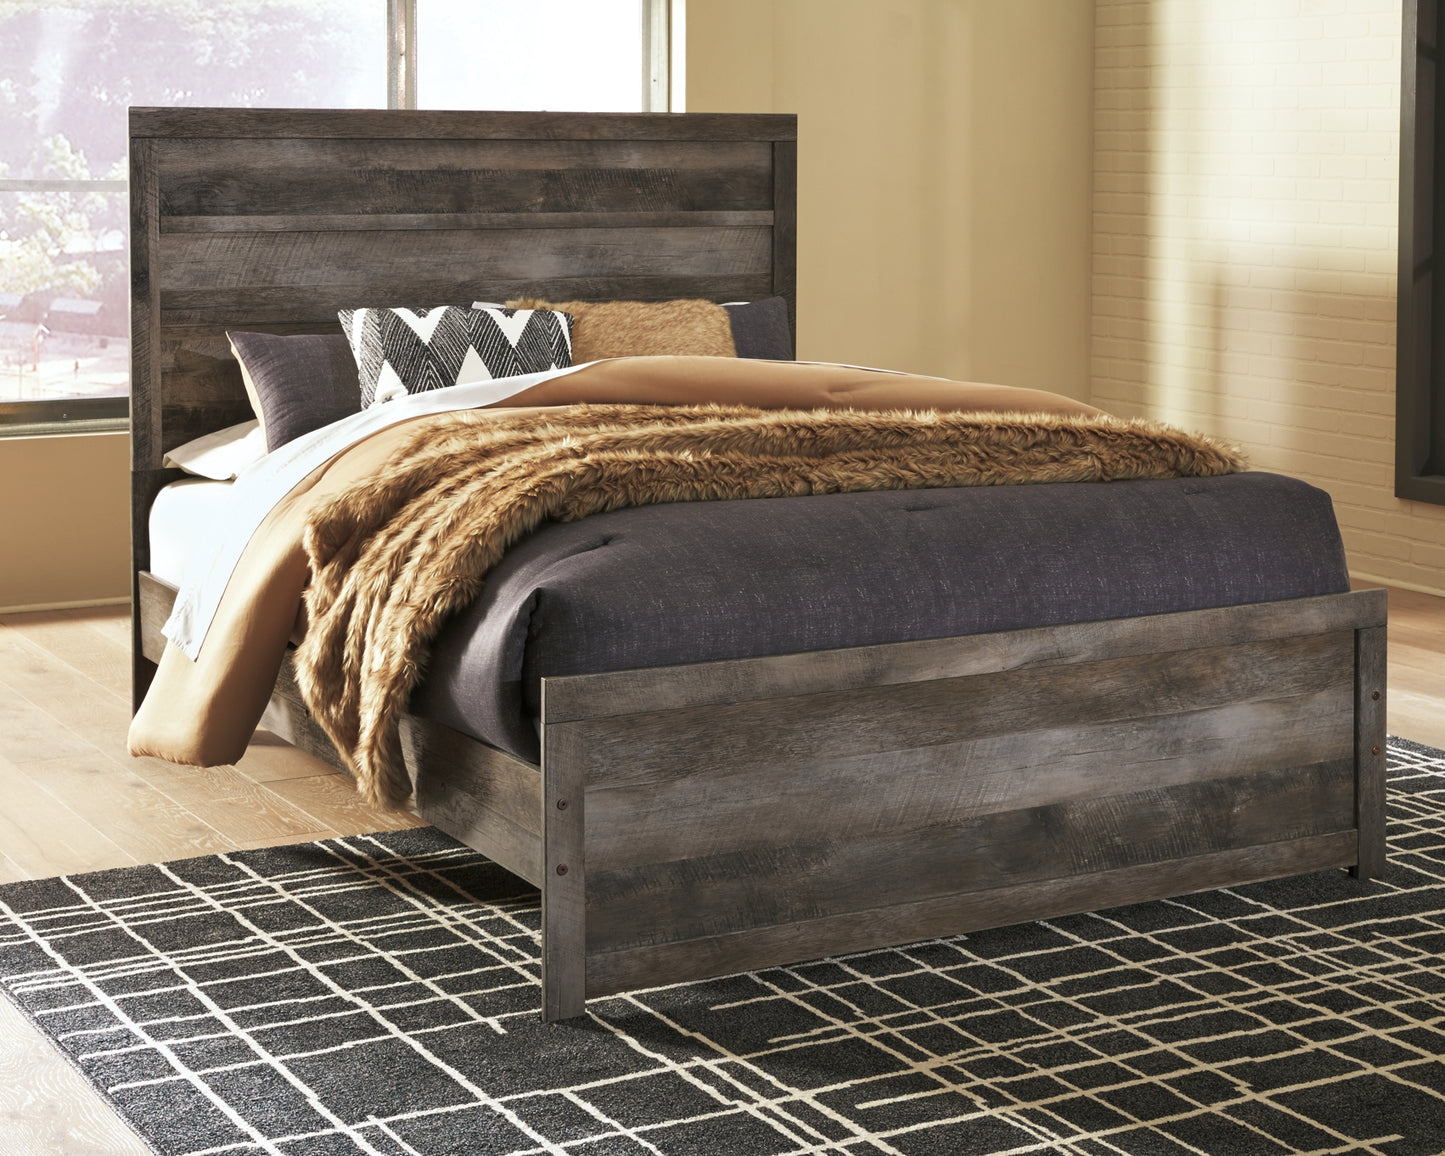 Wynnlow Queen Panel Bed with 2 Nightstands